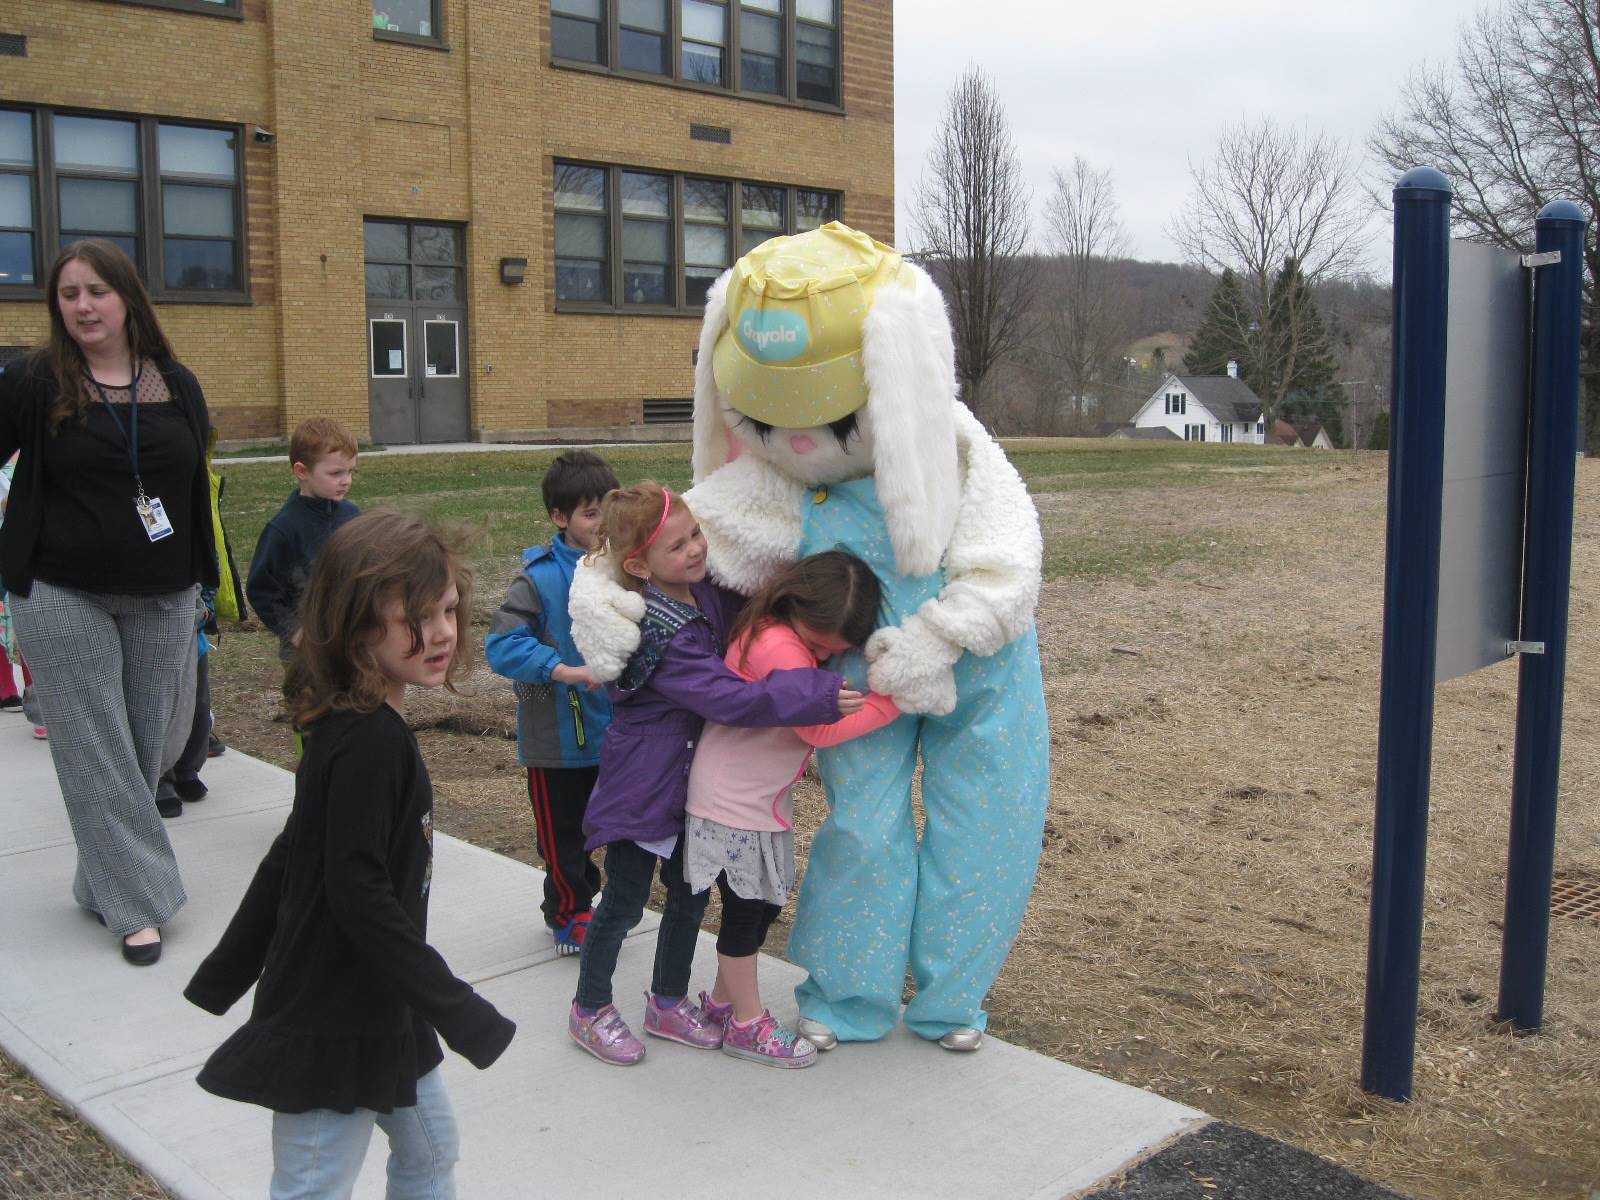 Students hug Easter Bunny while others watch.